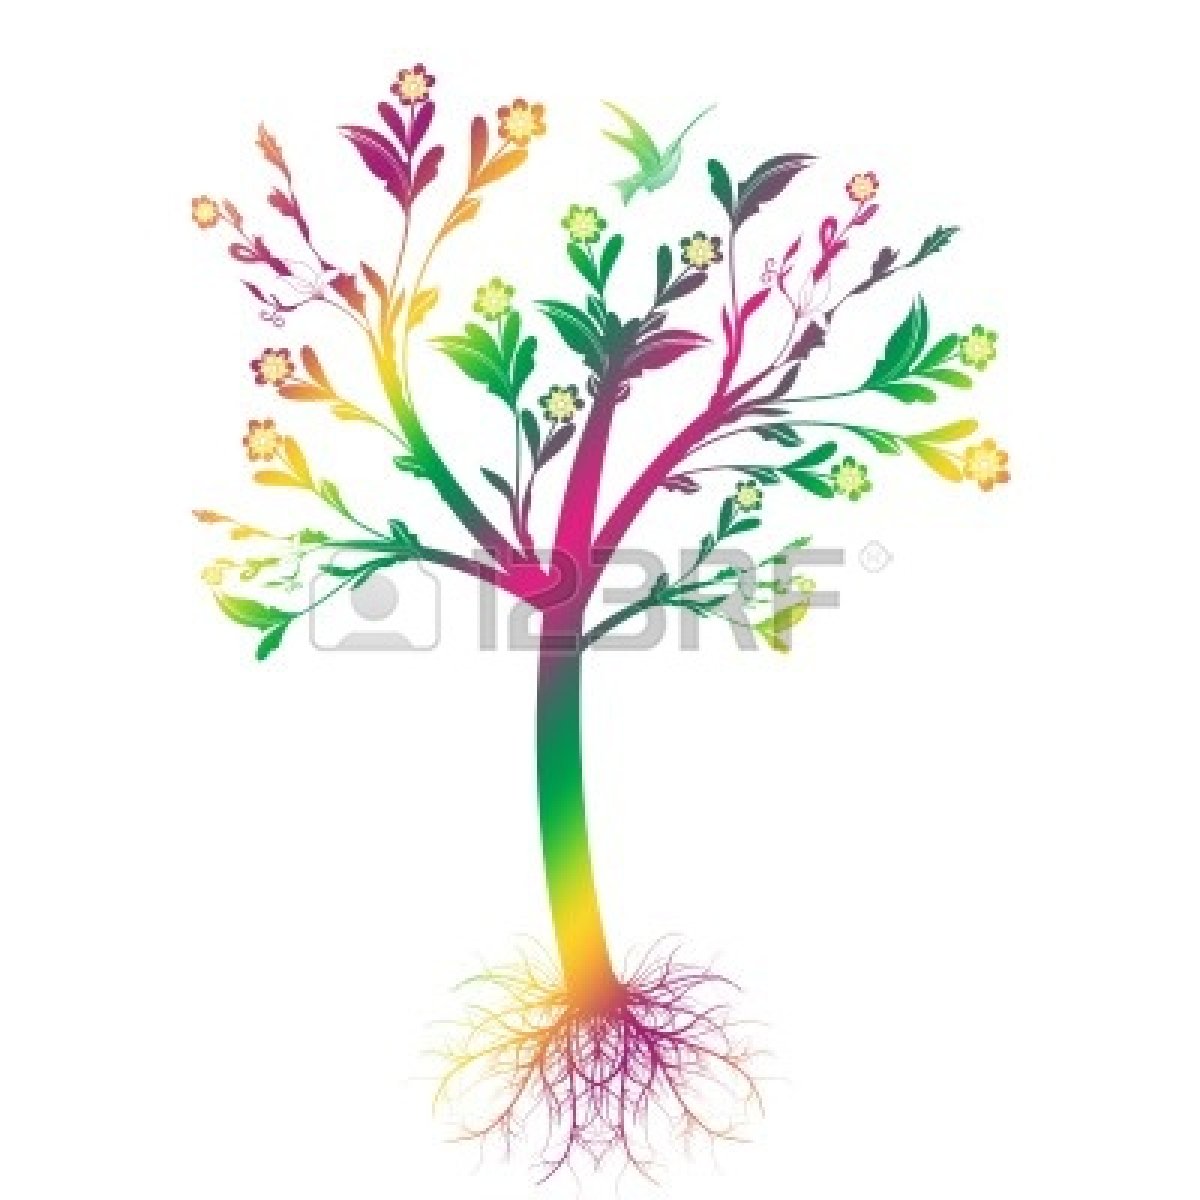 Colorful family tree.